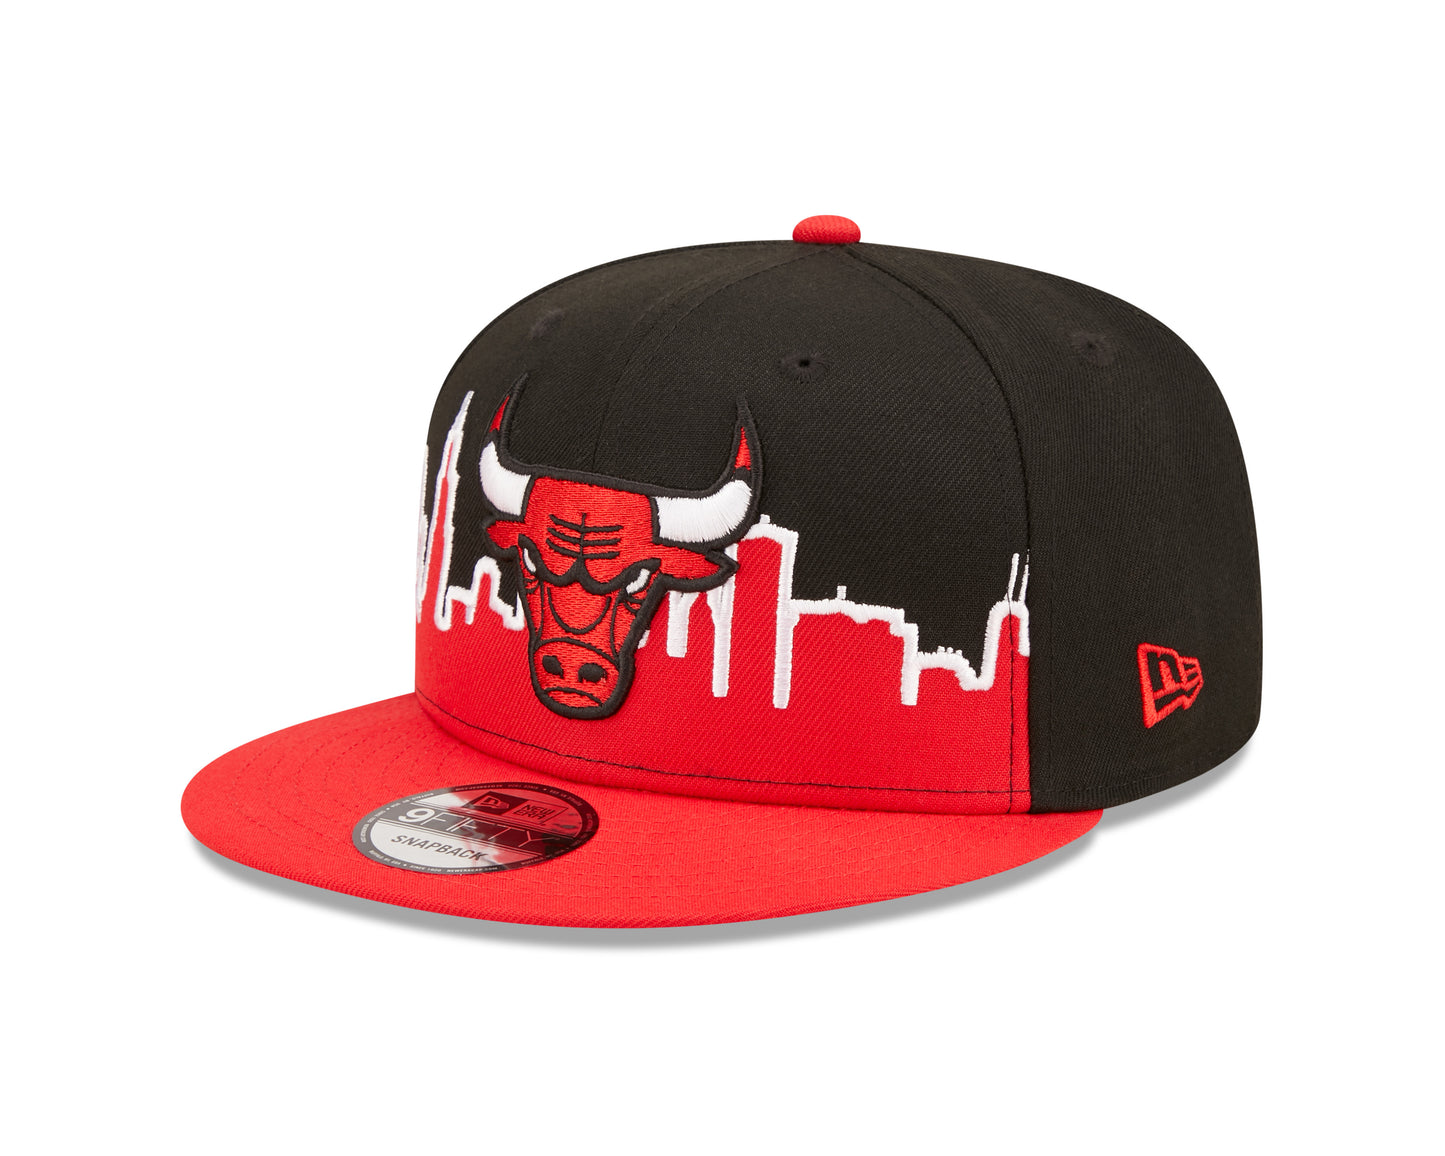 Chicago Bulls New Era Tip-Off 9FIFTY Snap Back Hat - Red/Black